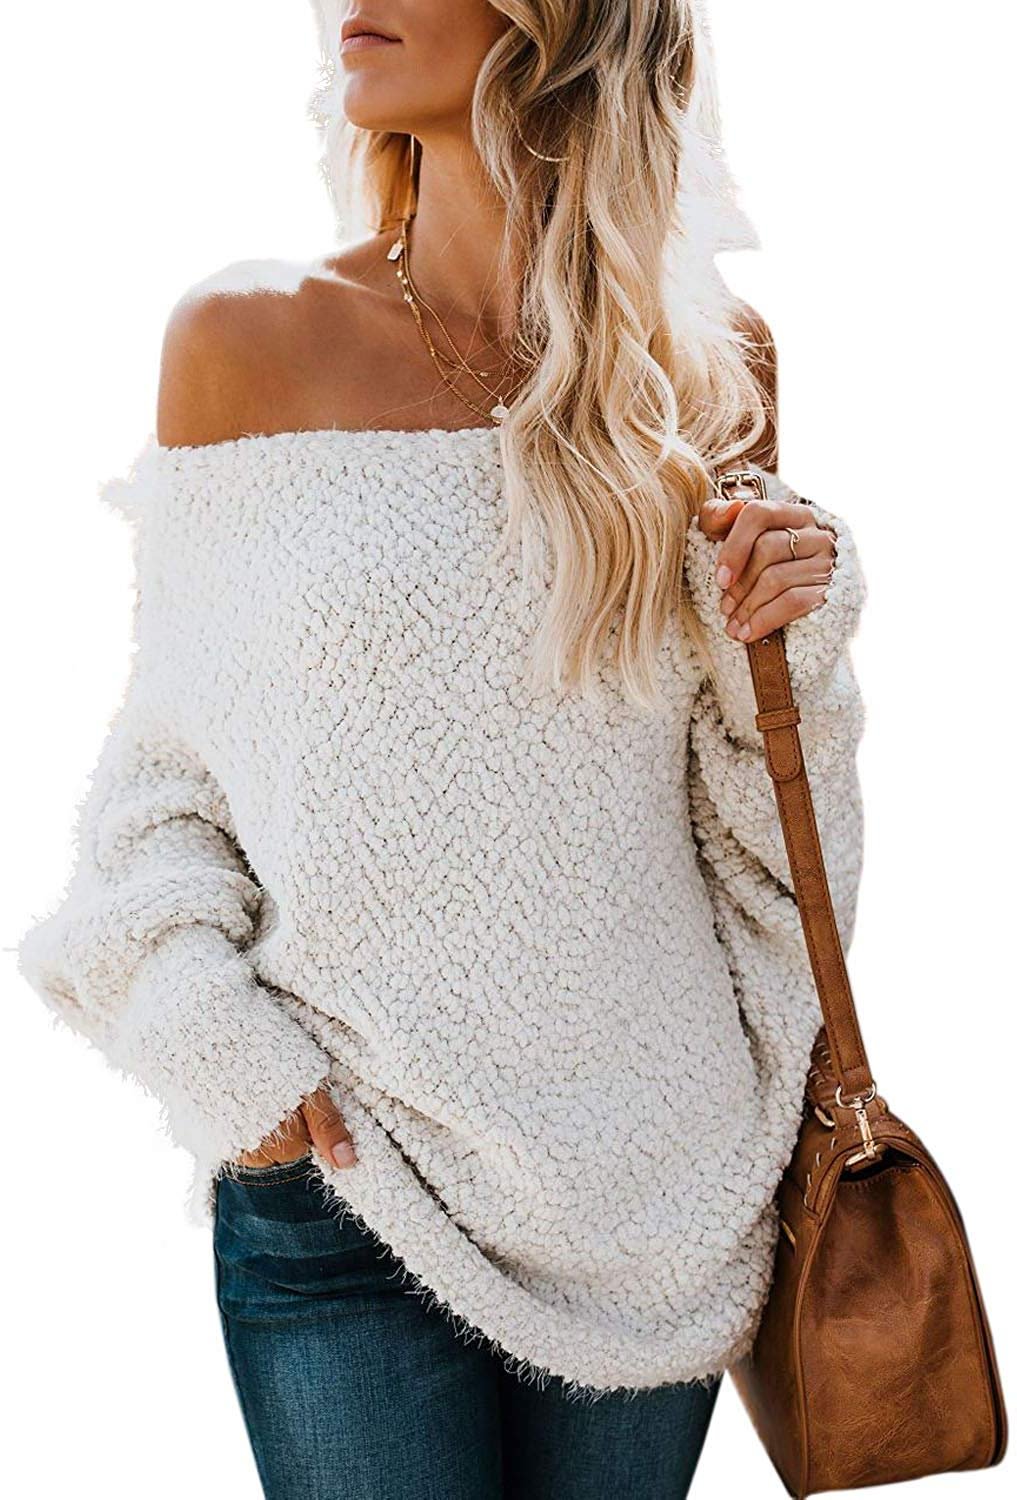 Womens Casual Long Sleeve Off The Shoulder Loose Knit Pullover Sweater Tops